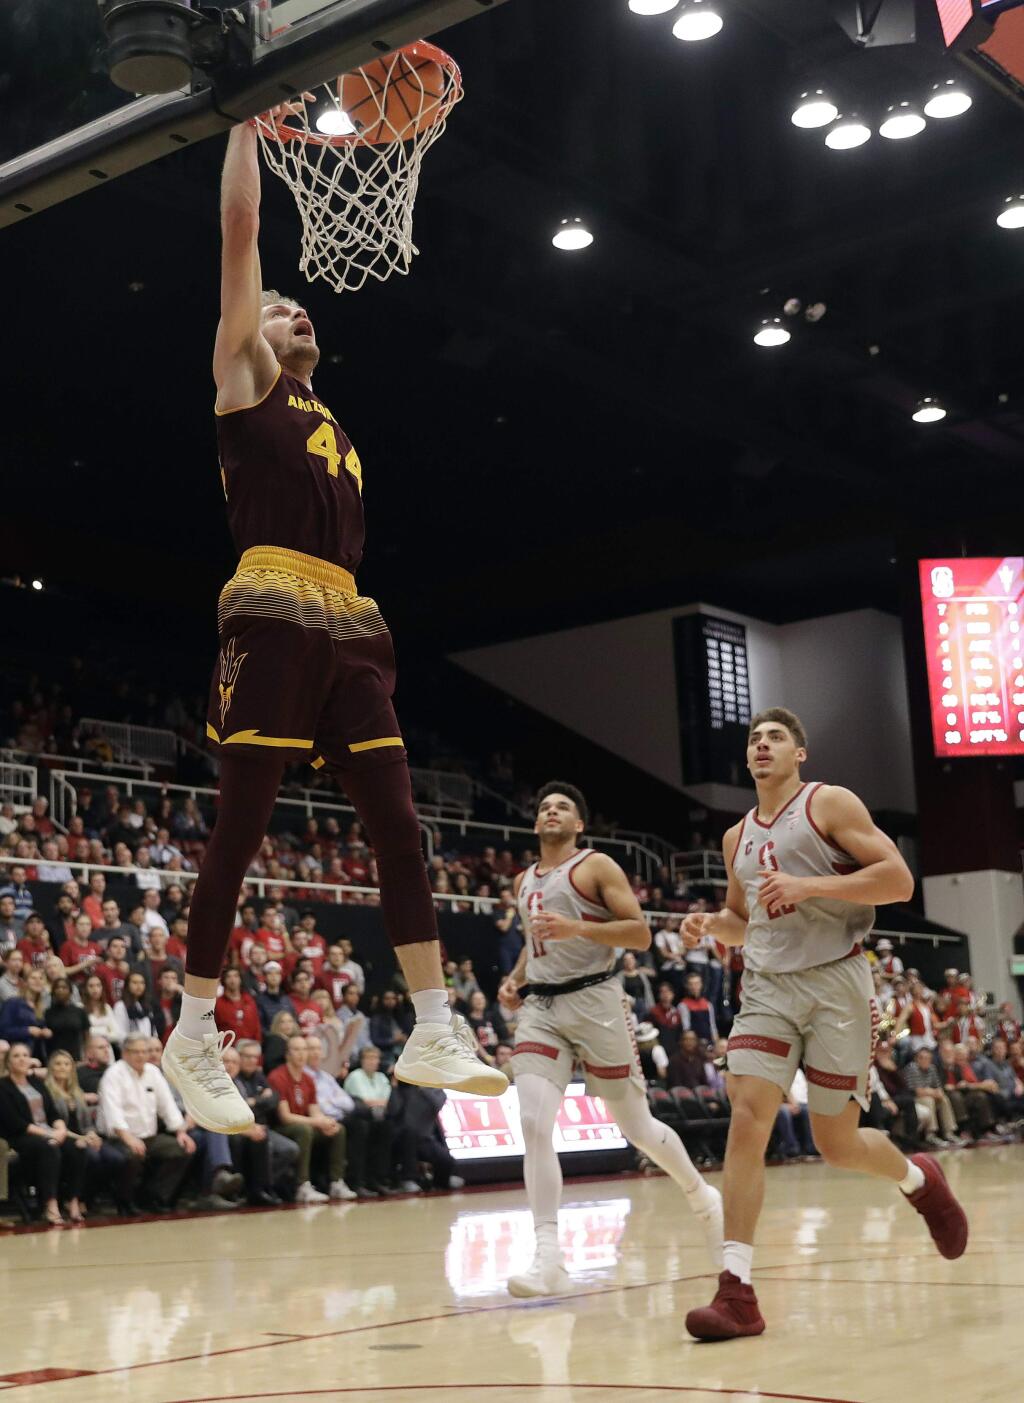 Arizona State guard Kodi Justice, top left, dunks against Stanford during the first half of an NCAA college basketball game Wednesday, Jan. 17, 2018, in Stanford, Calif. (AP Photo/Marcio Jose Sanchez)